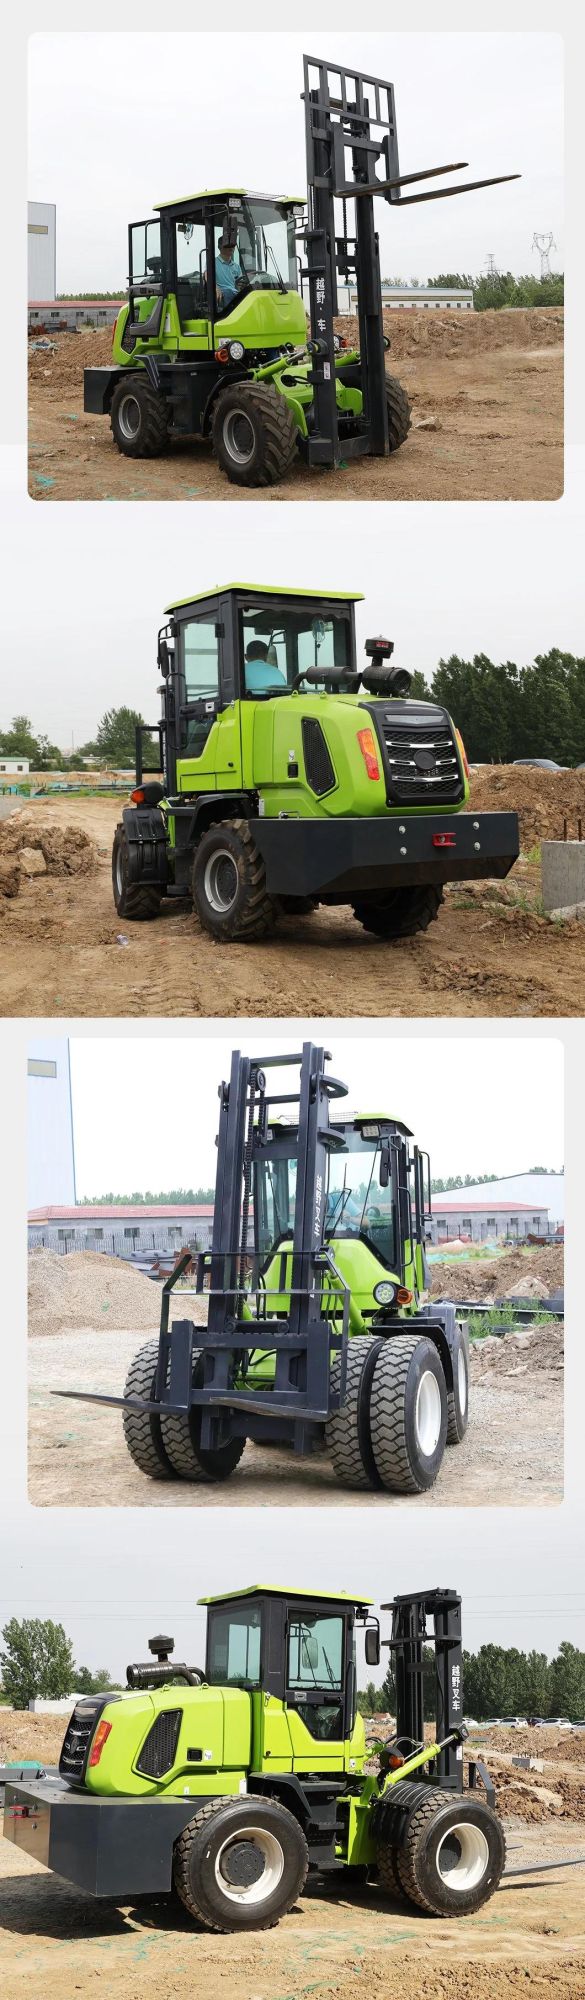 3 Ton Forklift for The Rugged Road of Swampy Cross - Country Forklift